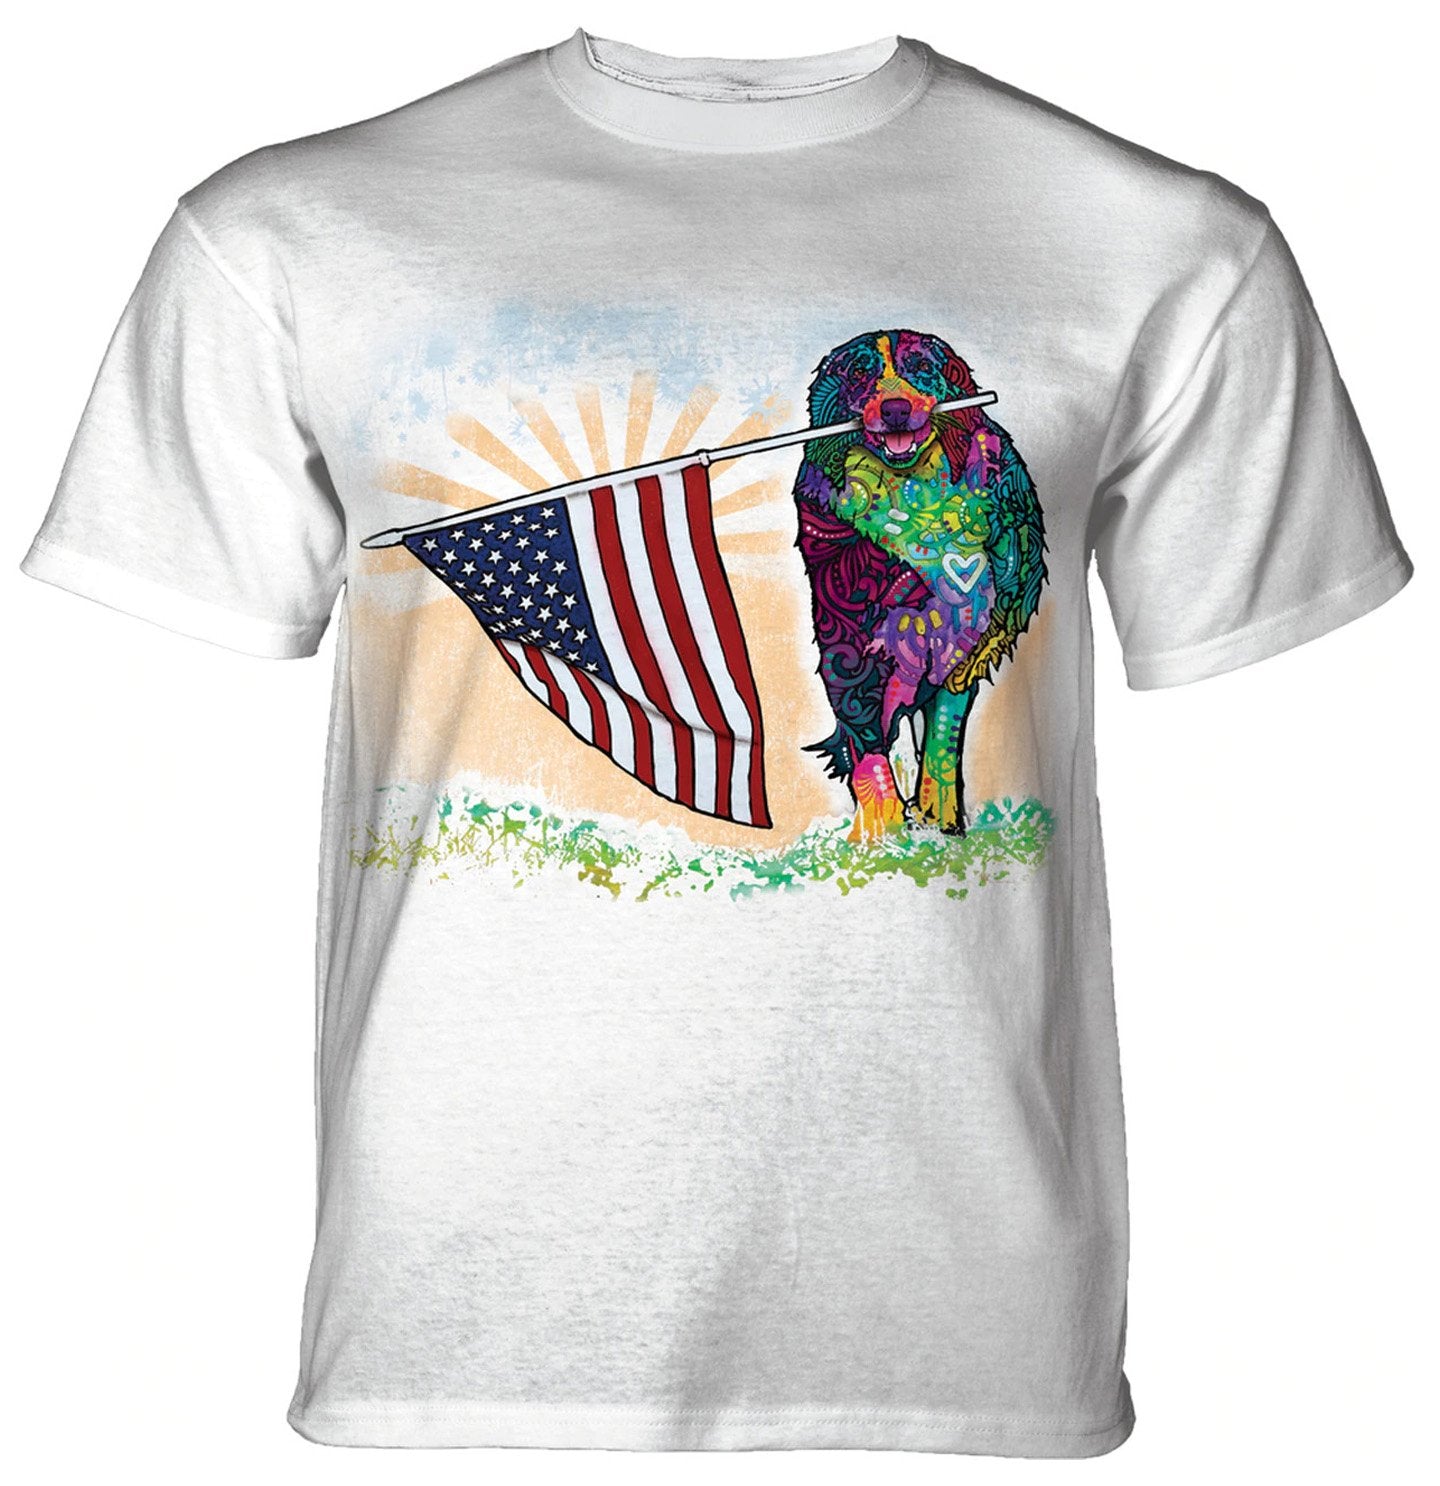 The Mountain - Russo Flag Up - Adult Unisex T-Shirt